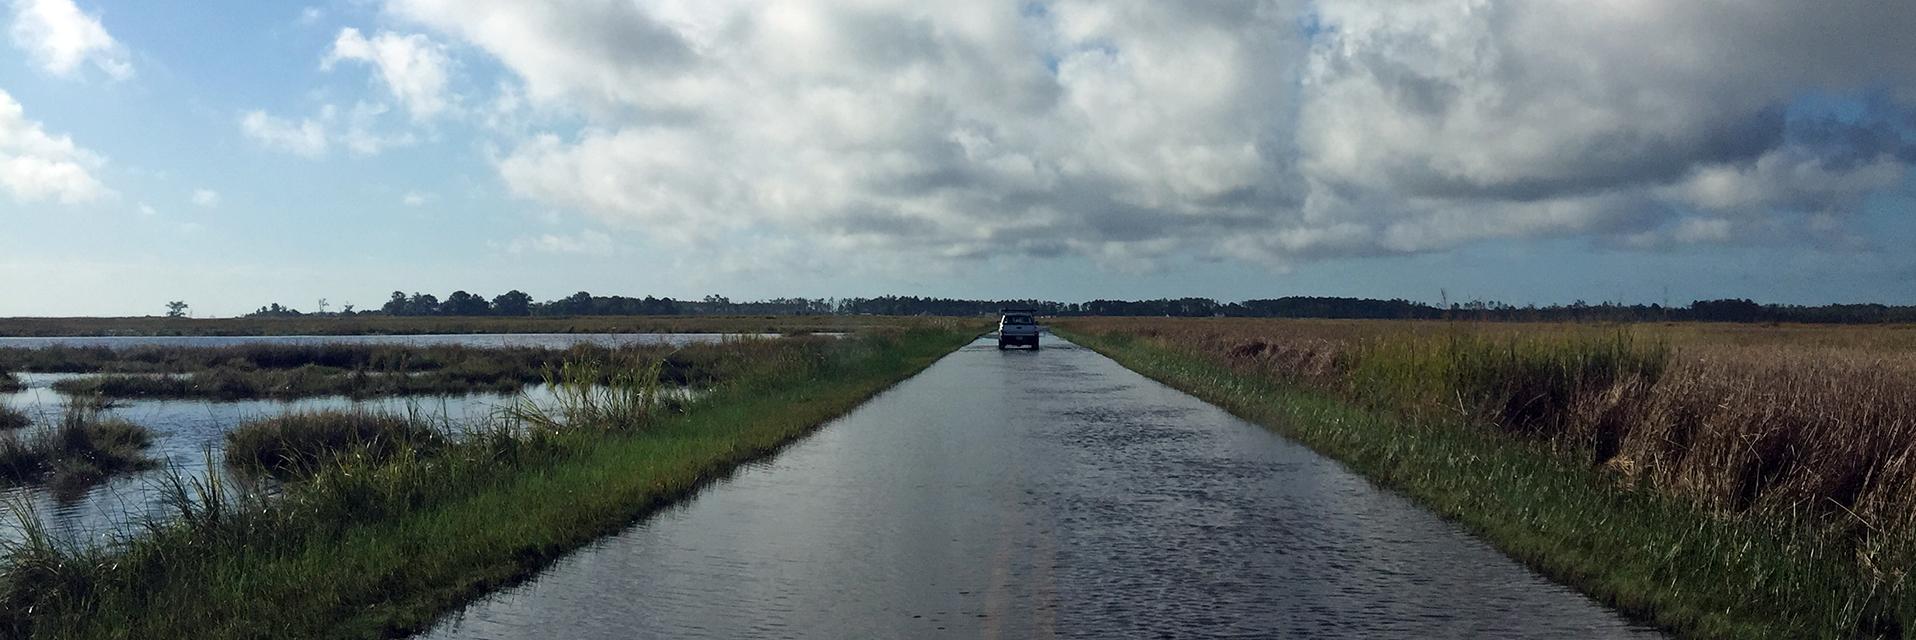 Image of flooding on Maple Dam Road in Dorchester County, Maryland